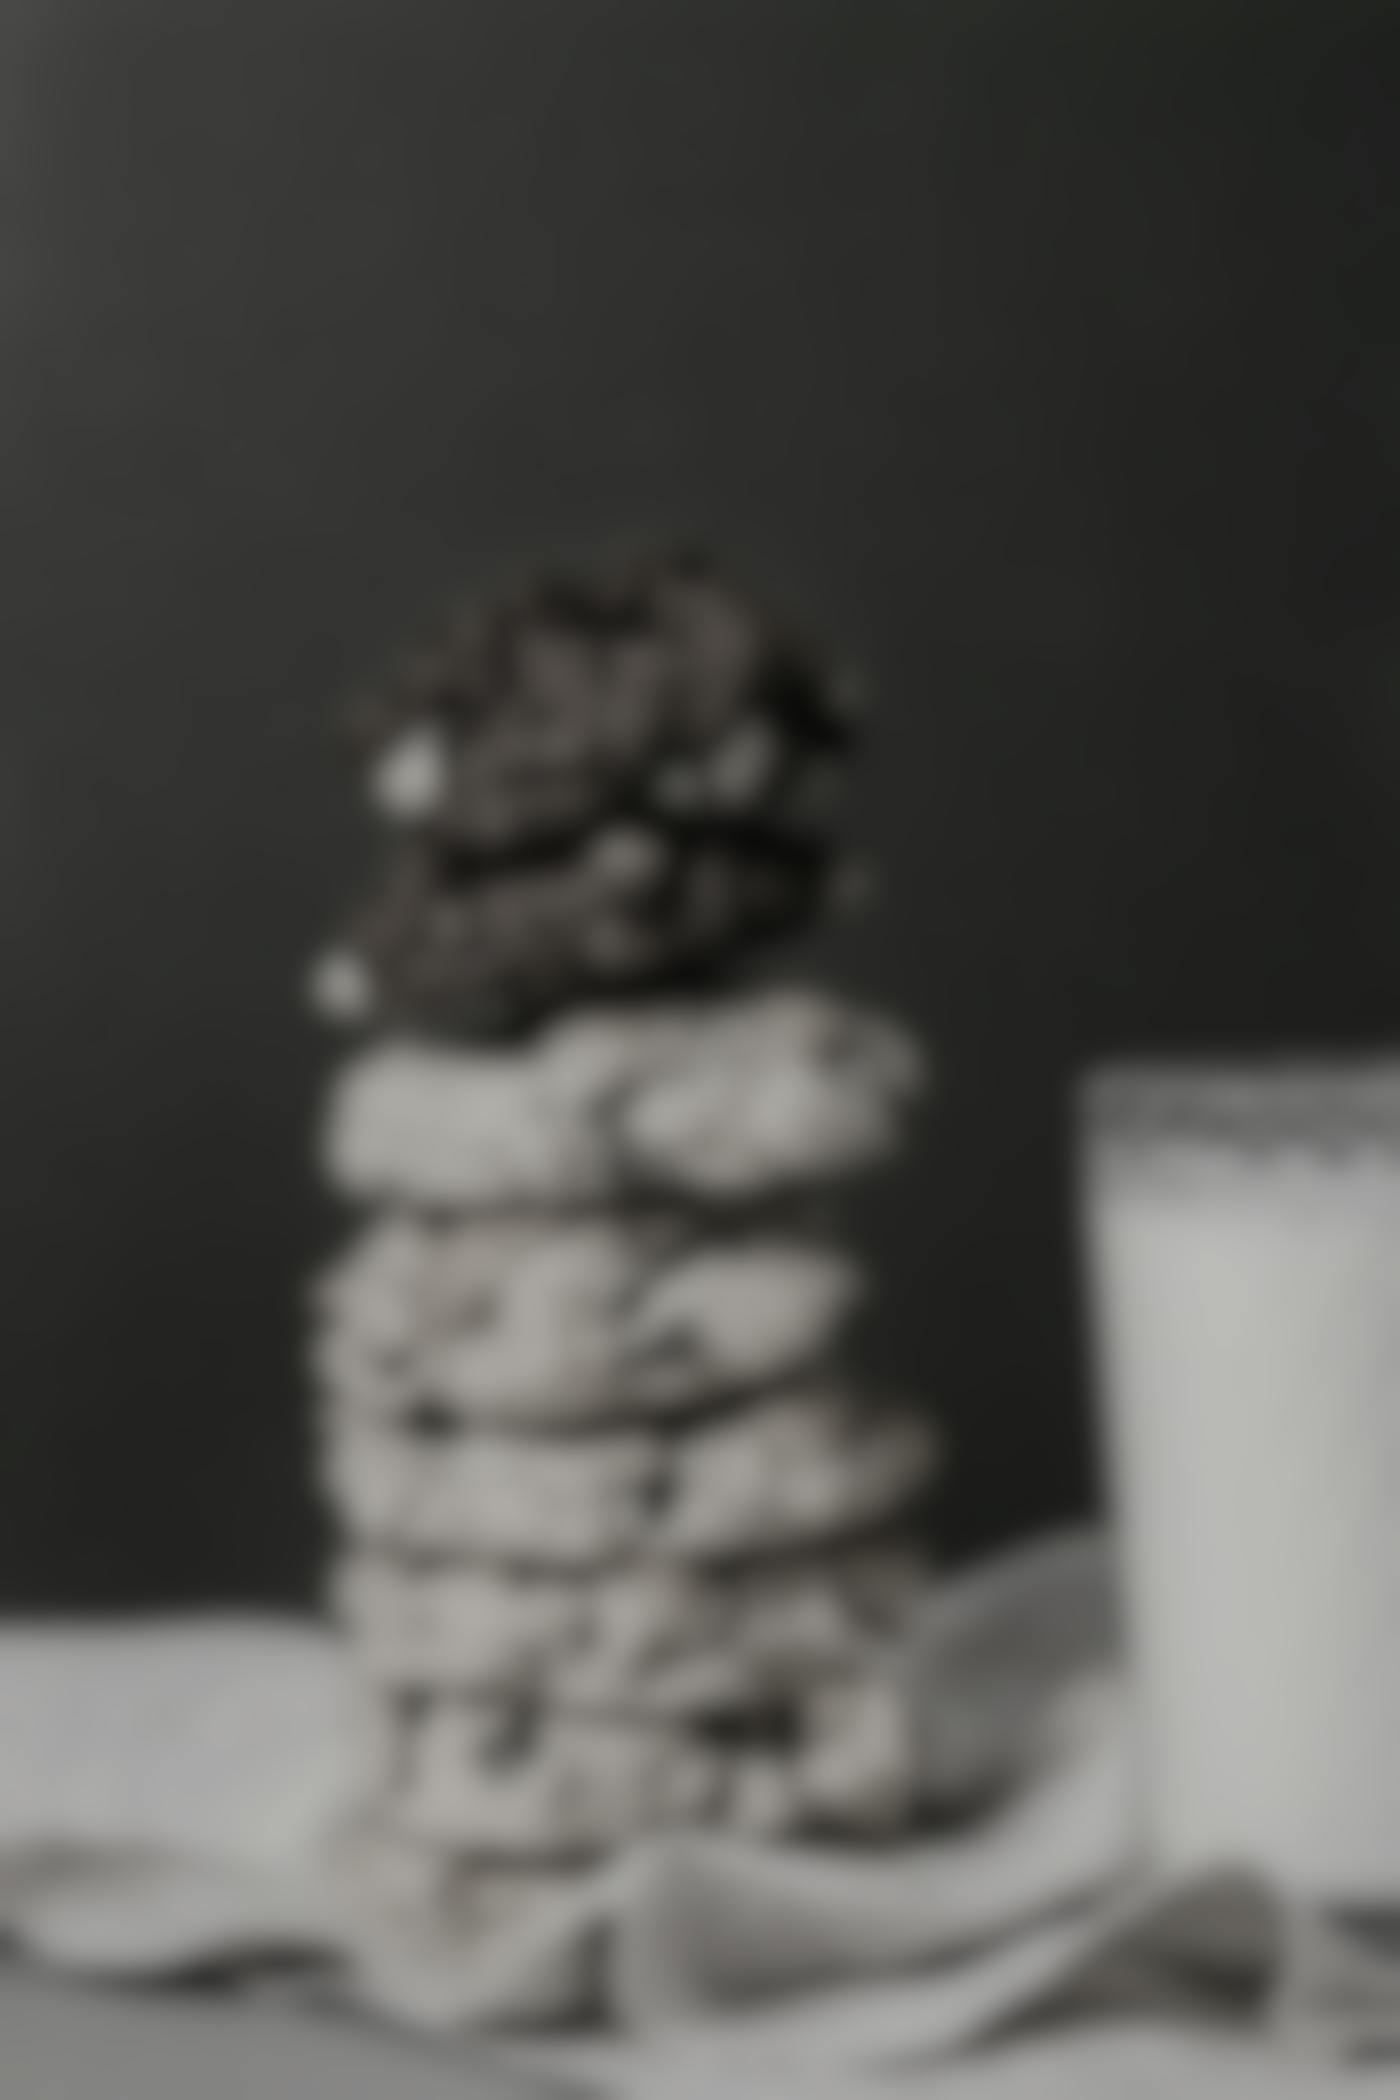 A stack of cookies next to a glass of milk